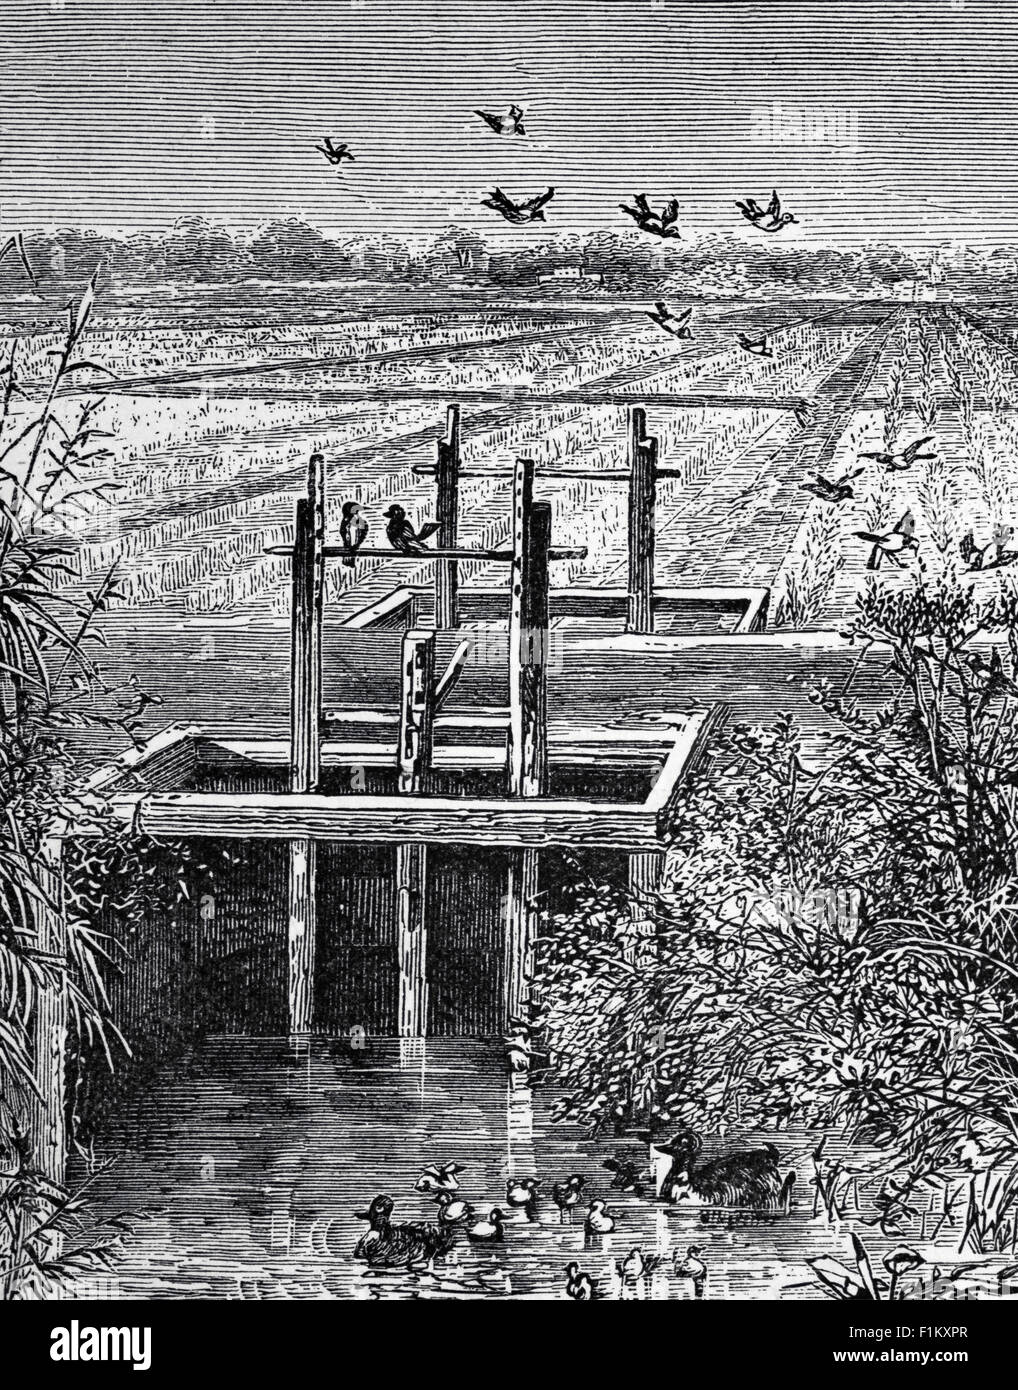 A late 19th Century illustration of wild ducks taking off from a paddy field in Carolina, USA. Rice was introduced in the mid-19th century. Emancipation in 1863 freed rice workers, but rice farming required hard, skilled work under extremely unhealthy conditions, and without slave labour, profits fell. Increasing automation in response came too late, and a series of hurricanes that hit Carolina in the late 1800s and damaged levees put an end to the industry. Stock Photo